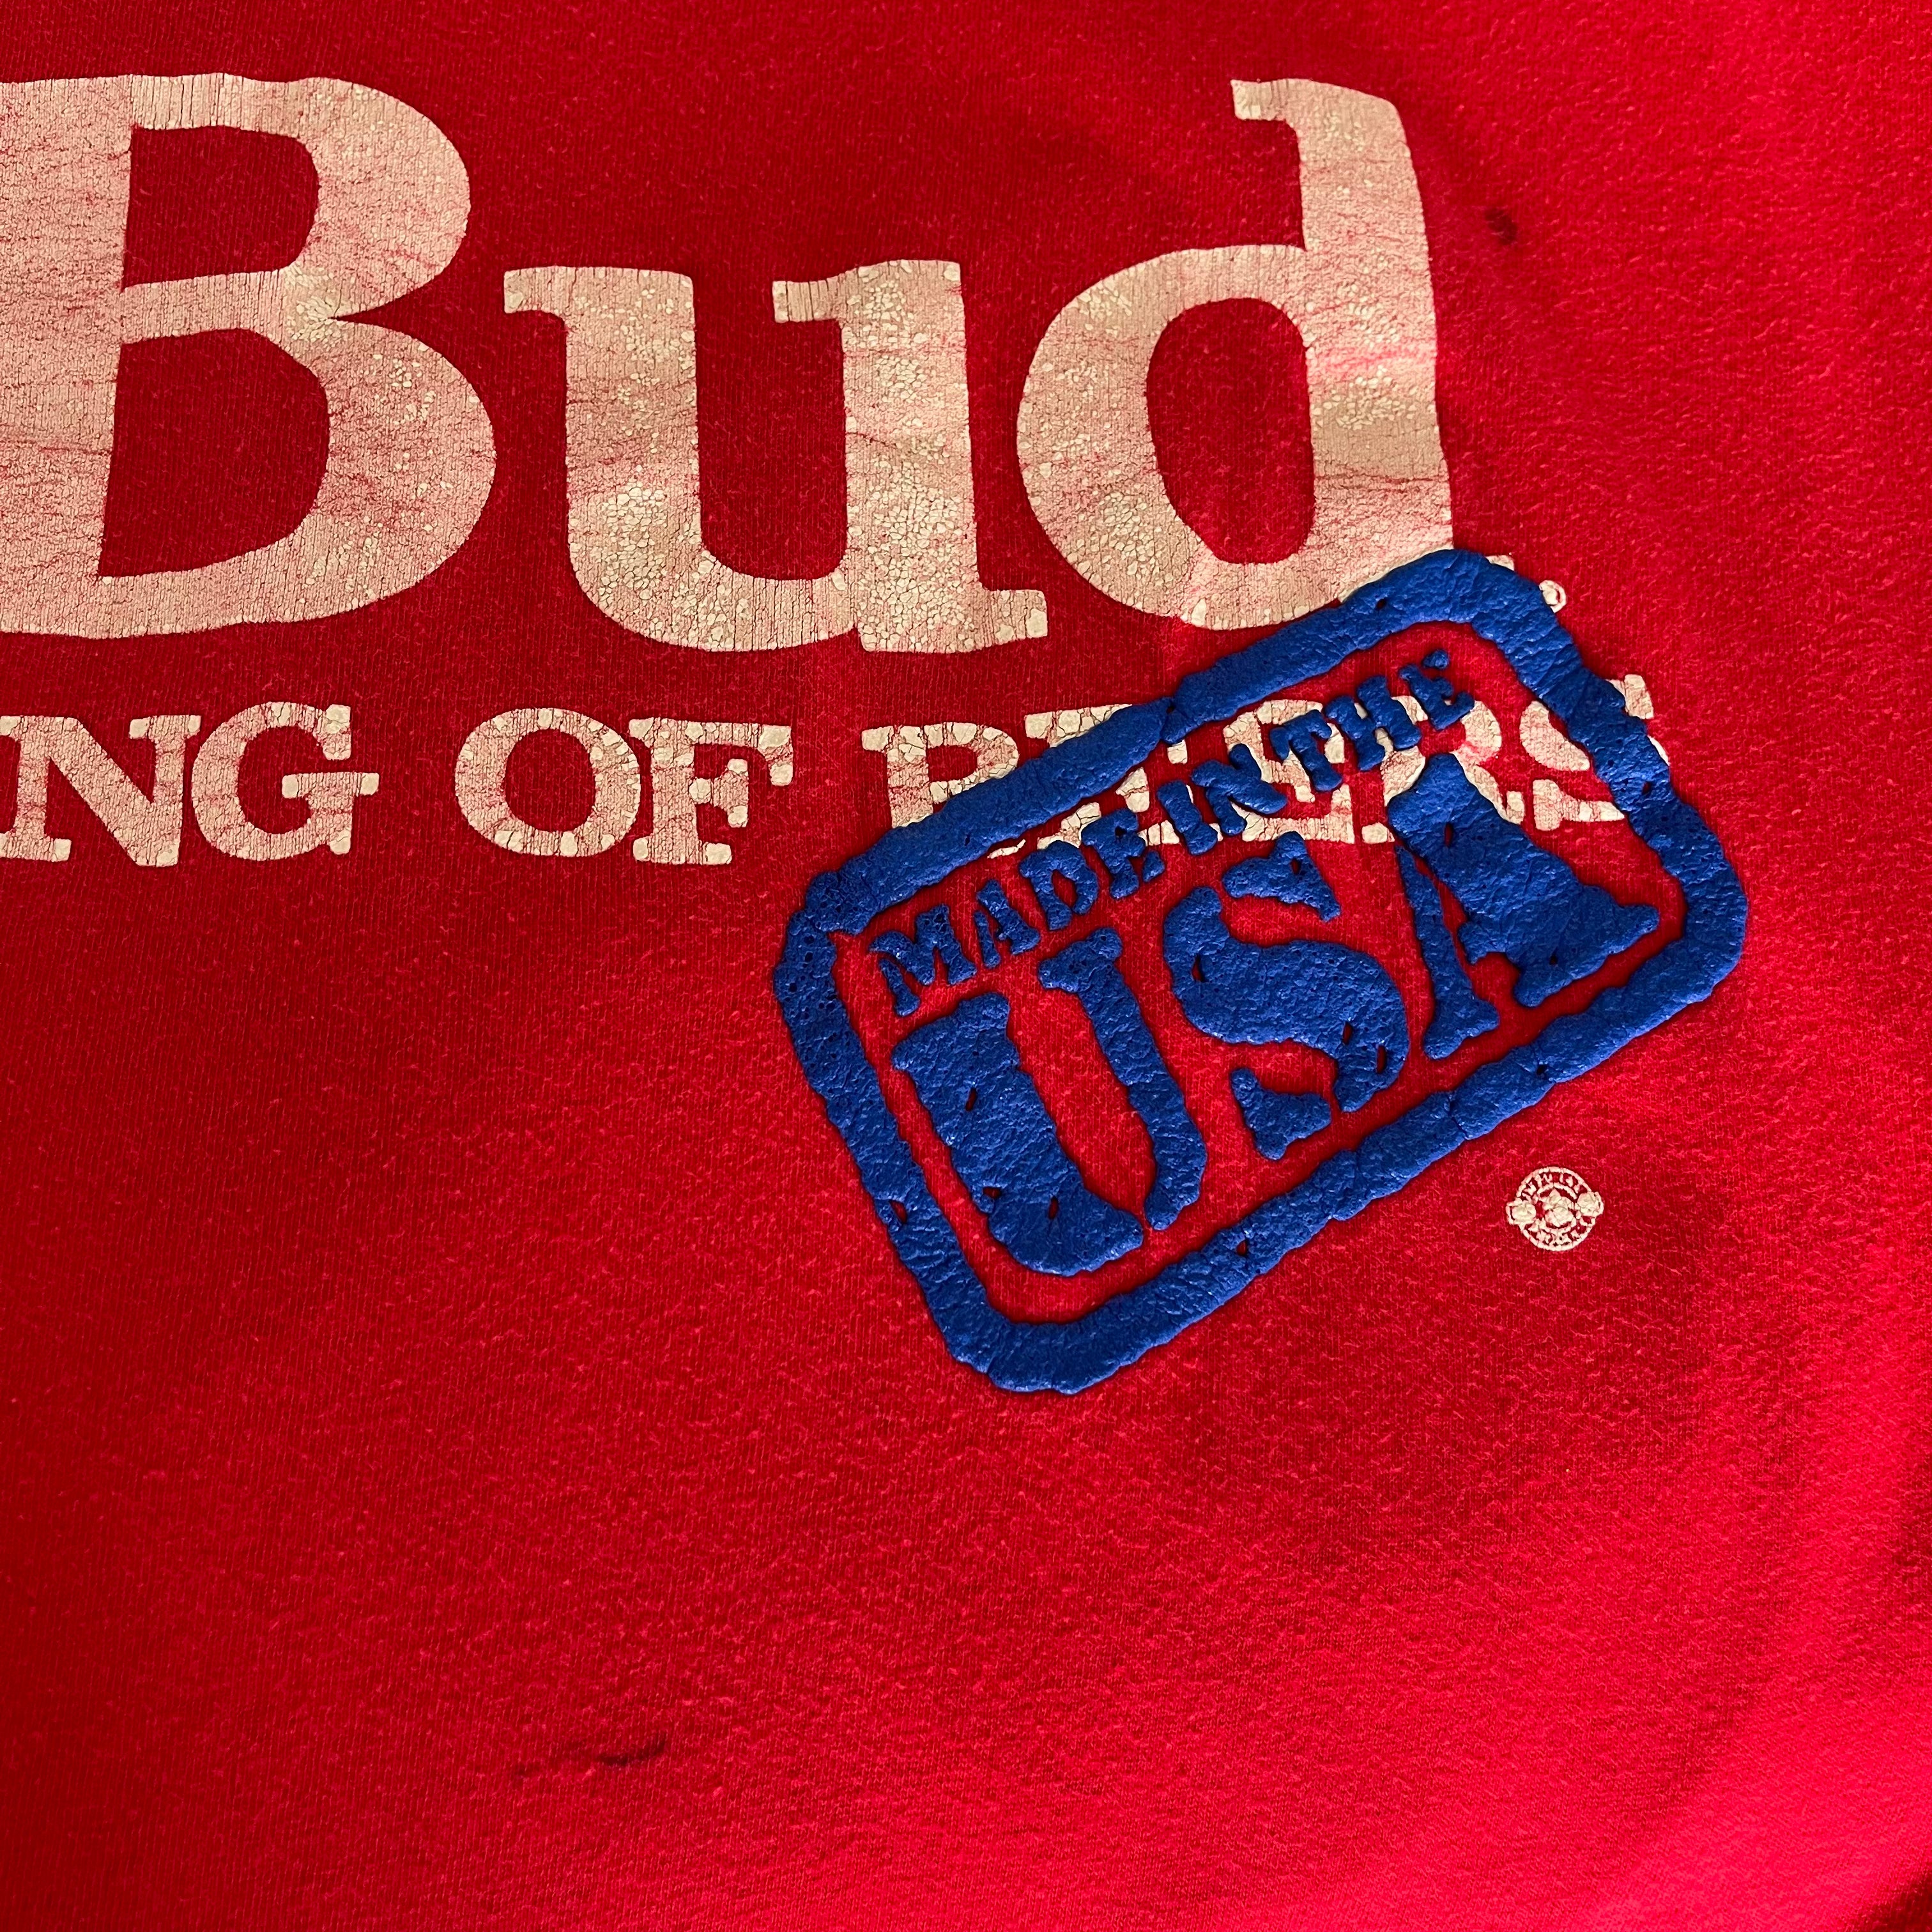 1980s Bud - The King Of Beers - Cotton T-Shirt